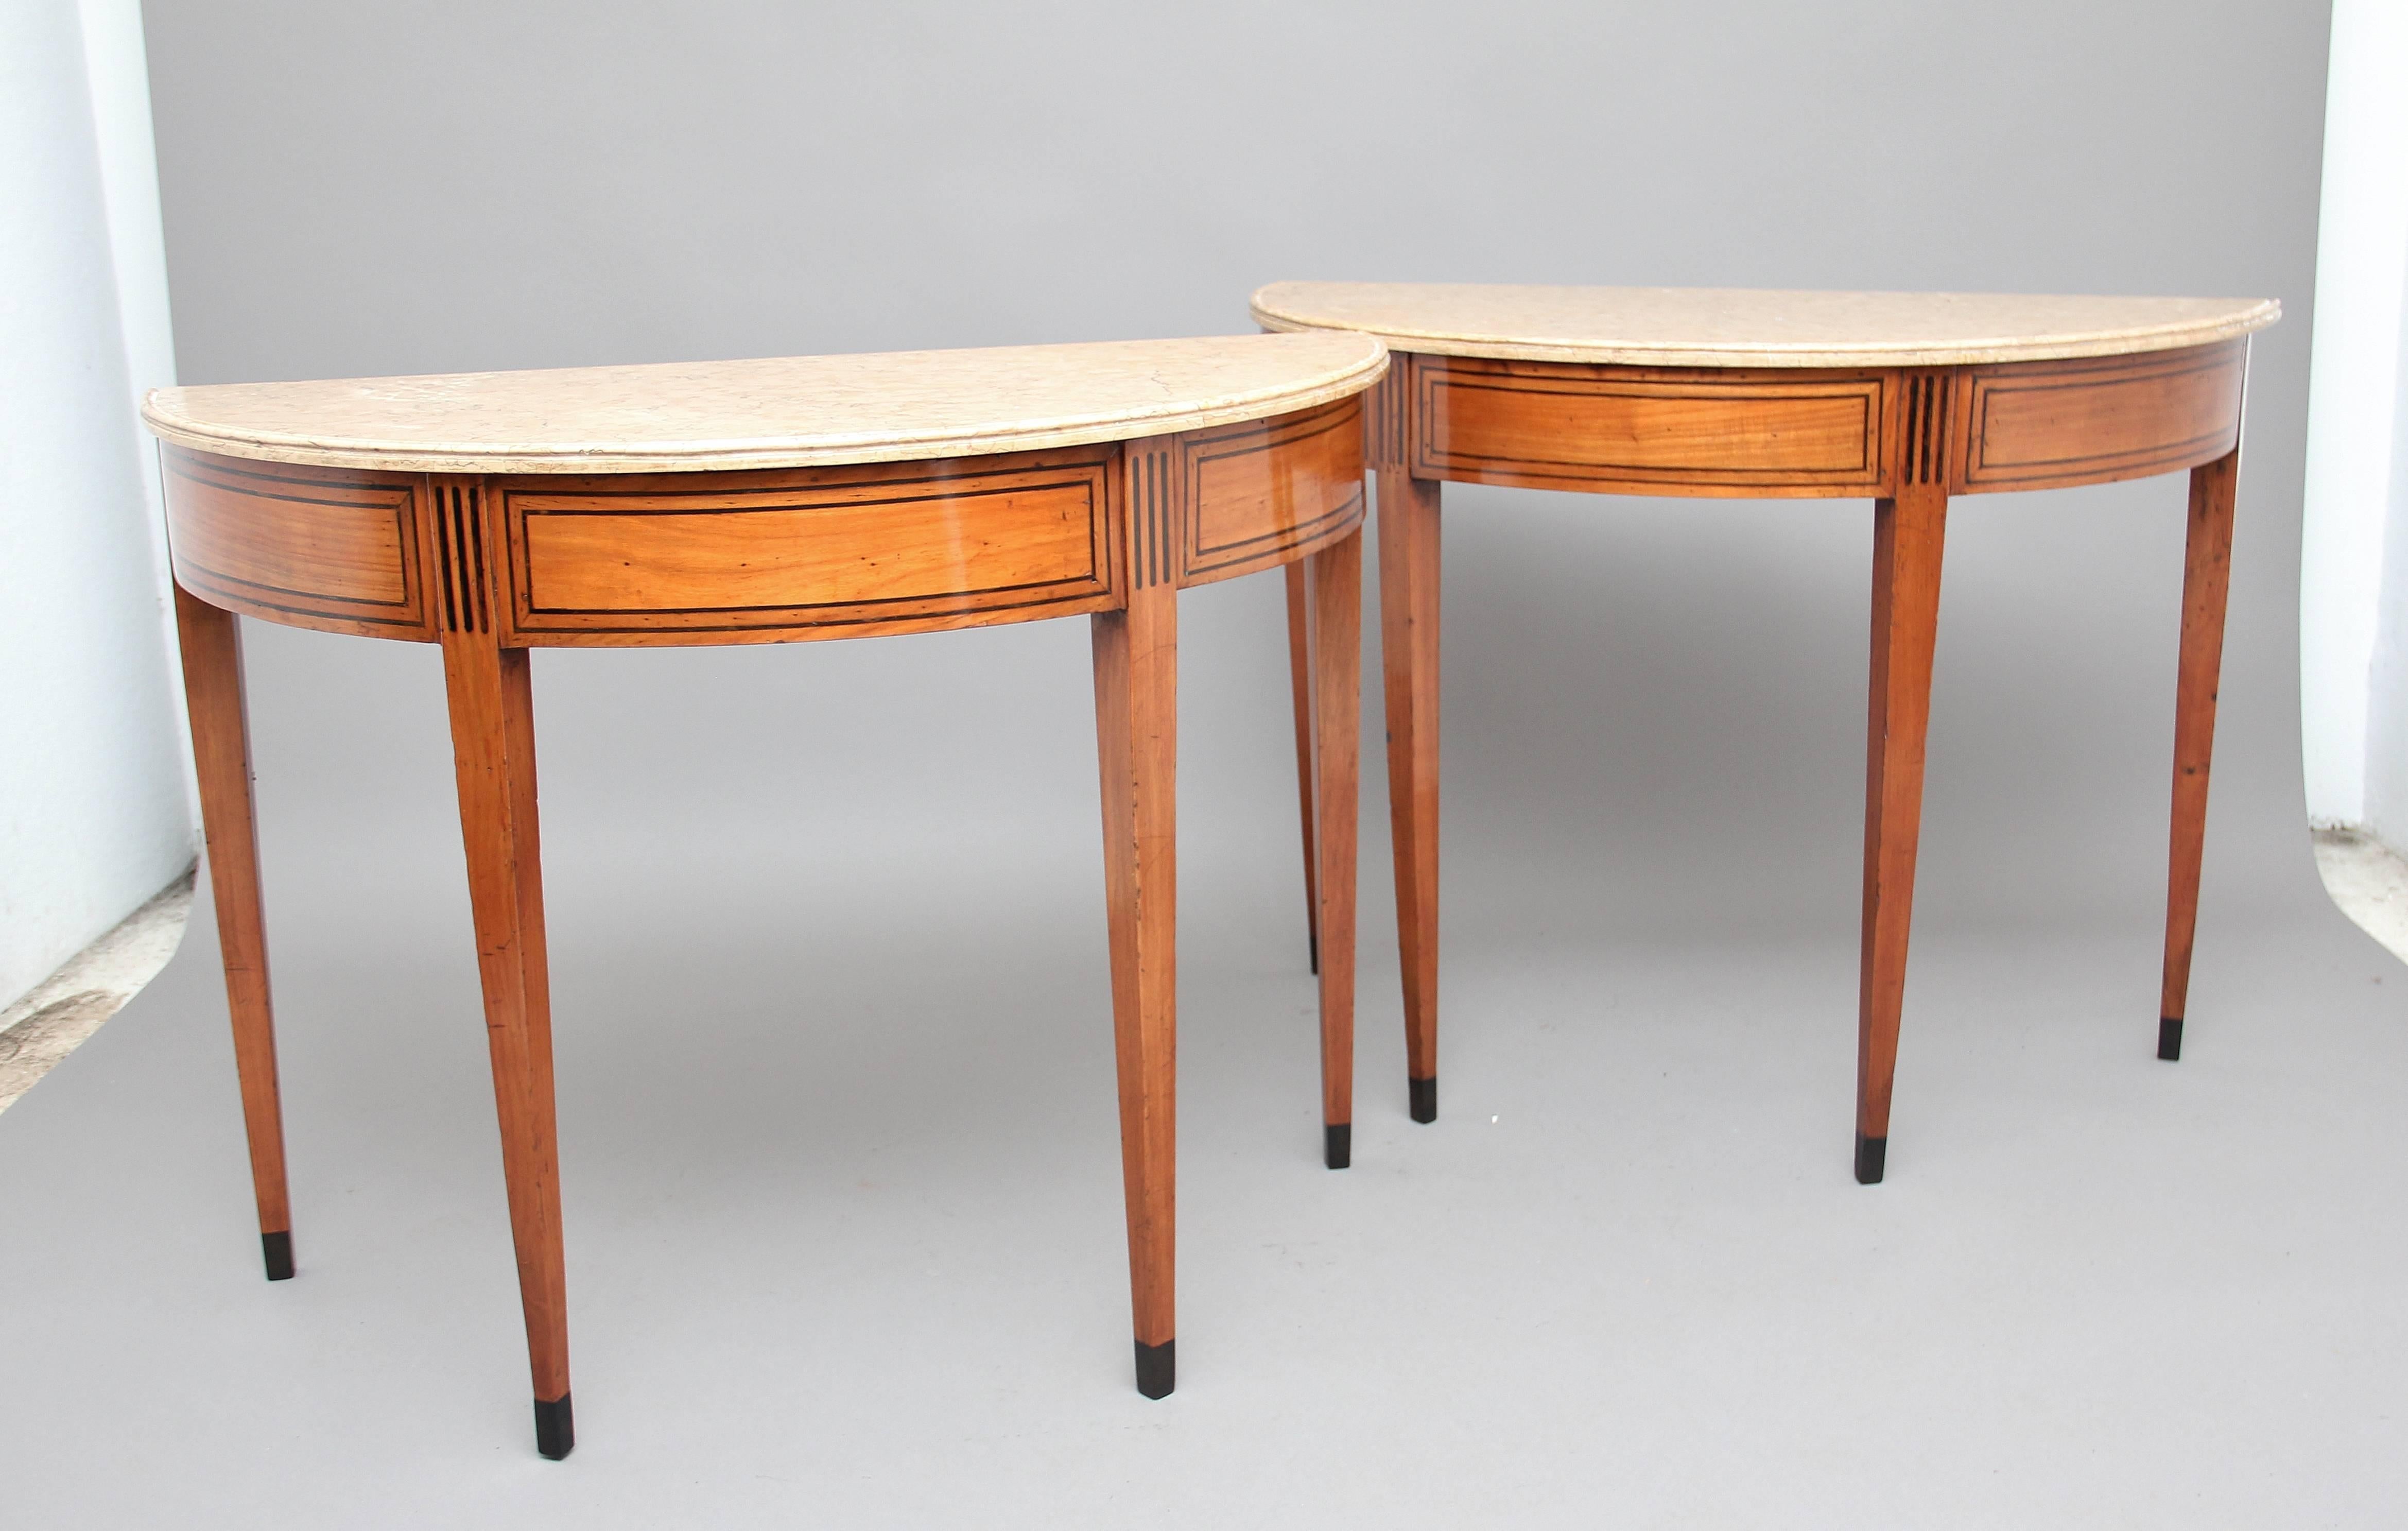 A superb pair of early 19th century Italian fruitwood consul tables inlaid with ebony, the ebony inlay works very well with the lovely warm colour of the fruitwood, having lovely figured and moulded marble tops, standing on square tapered legs. A